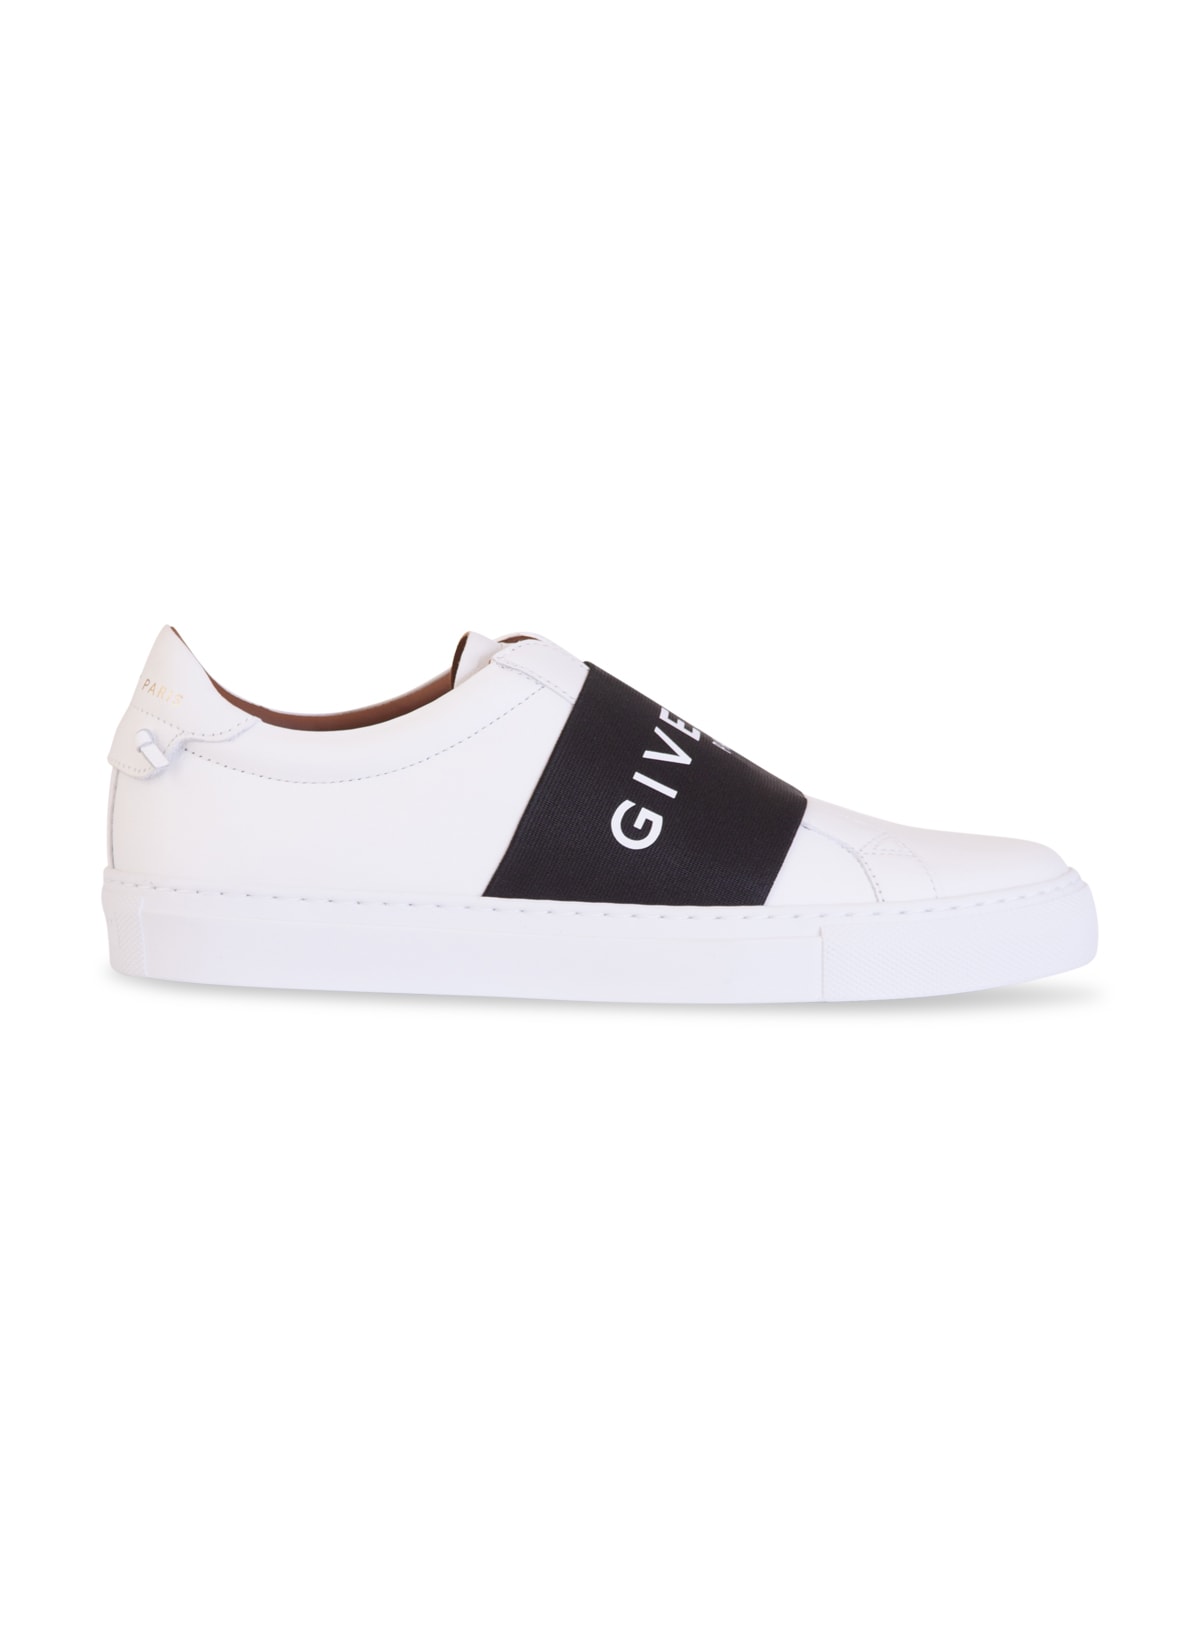 Givenchy Slip-on Band Sneakers